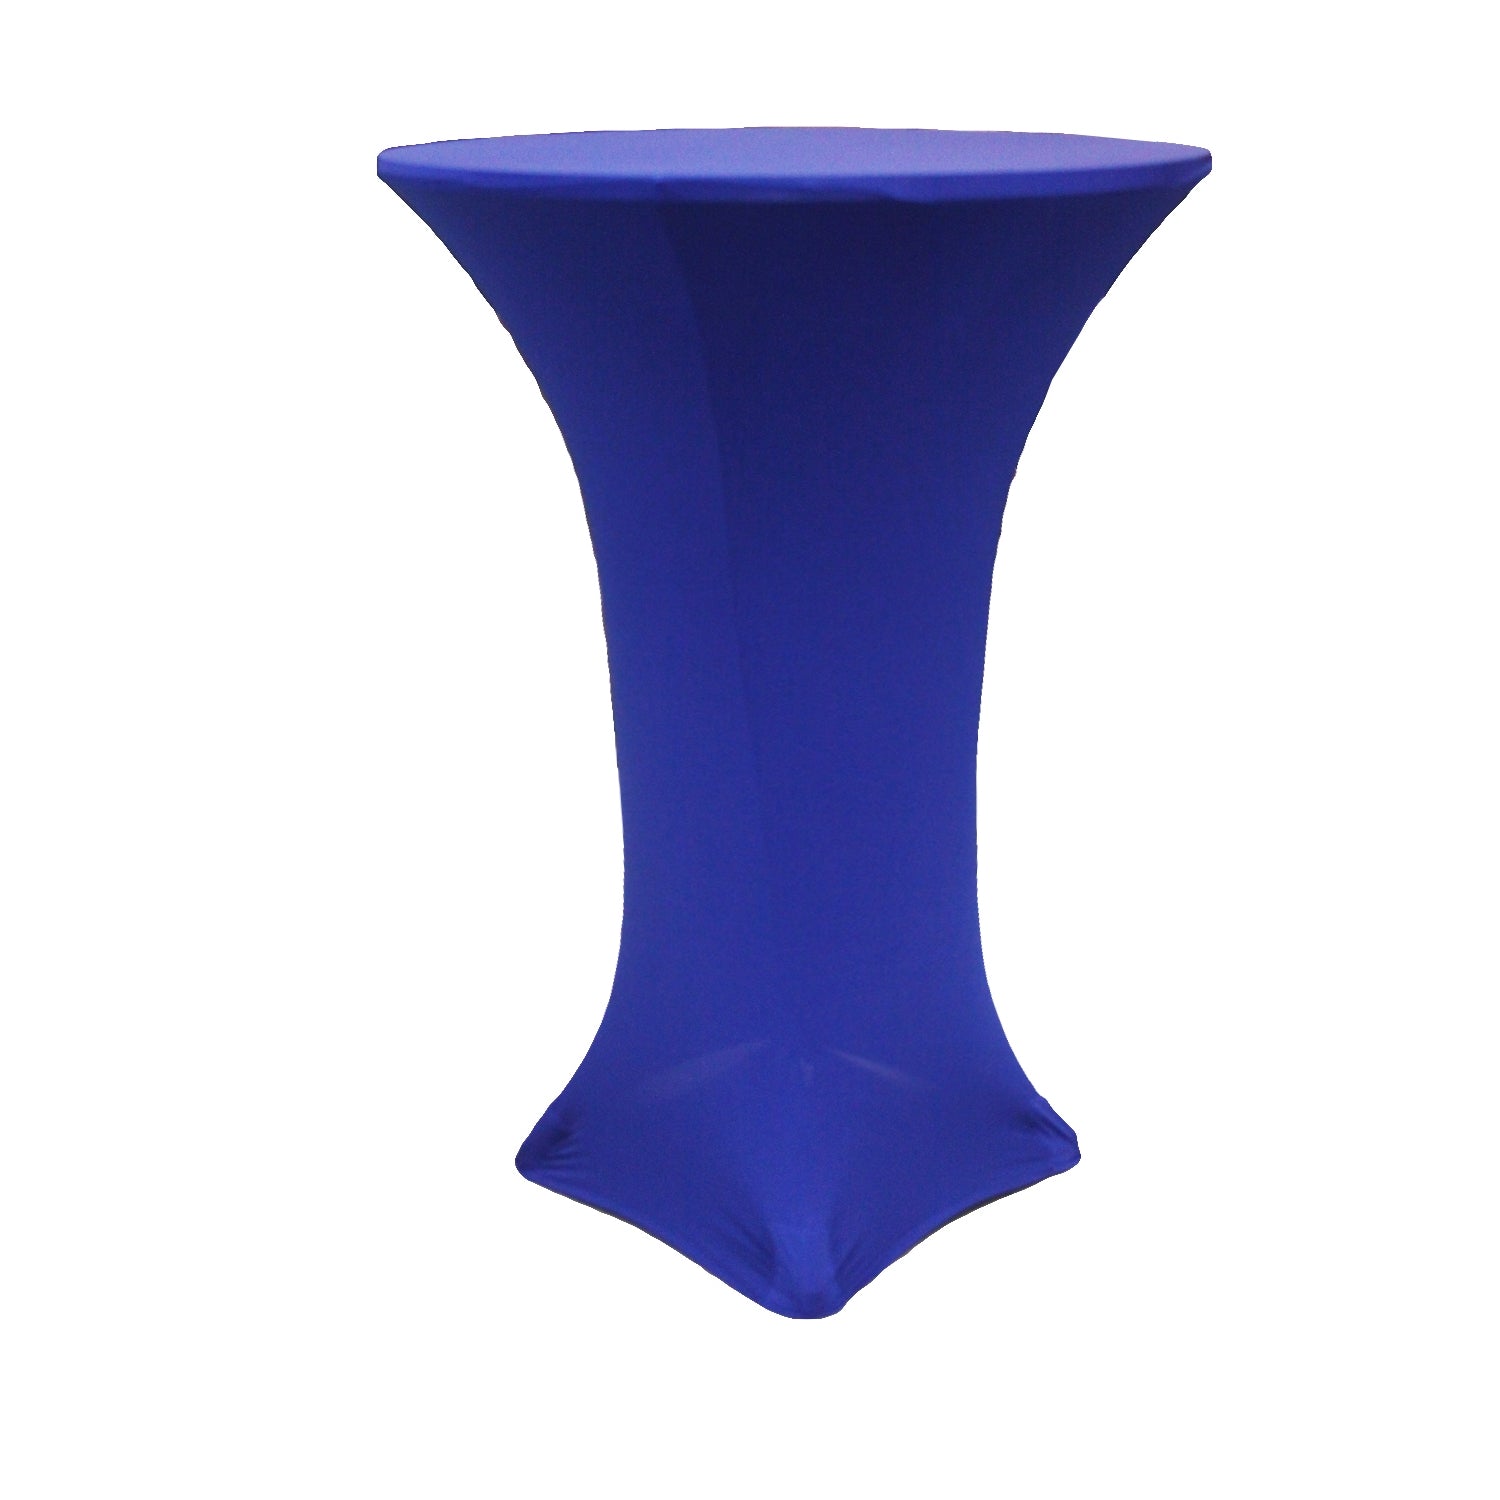 Spandex Cocktail Table Cover 36" Round - Royal Blue - CV Linens